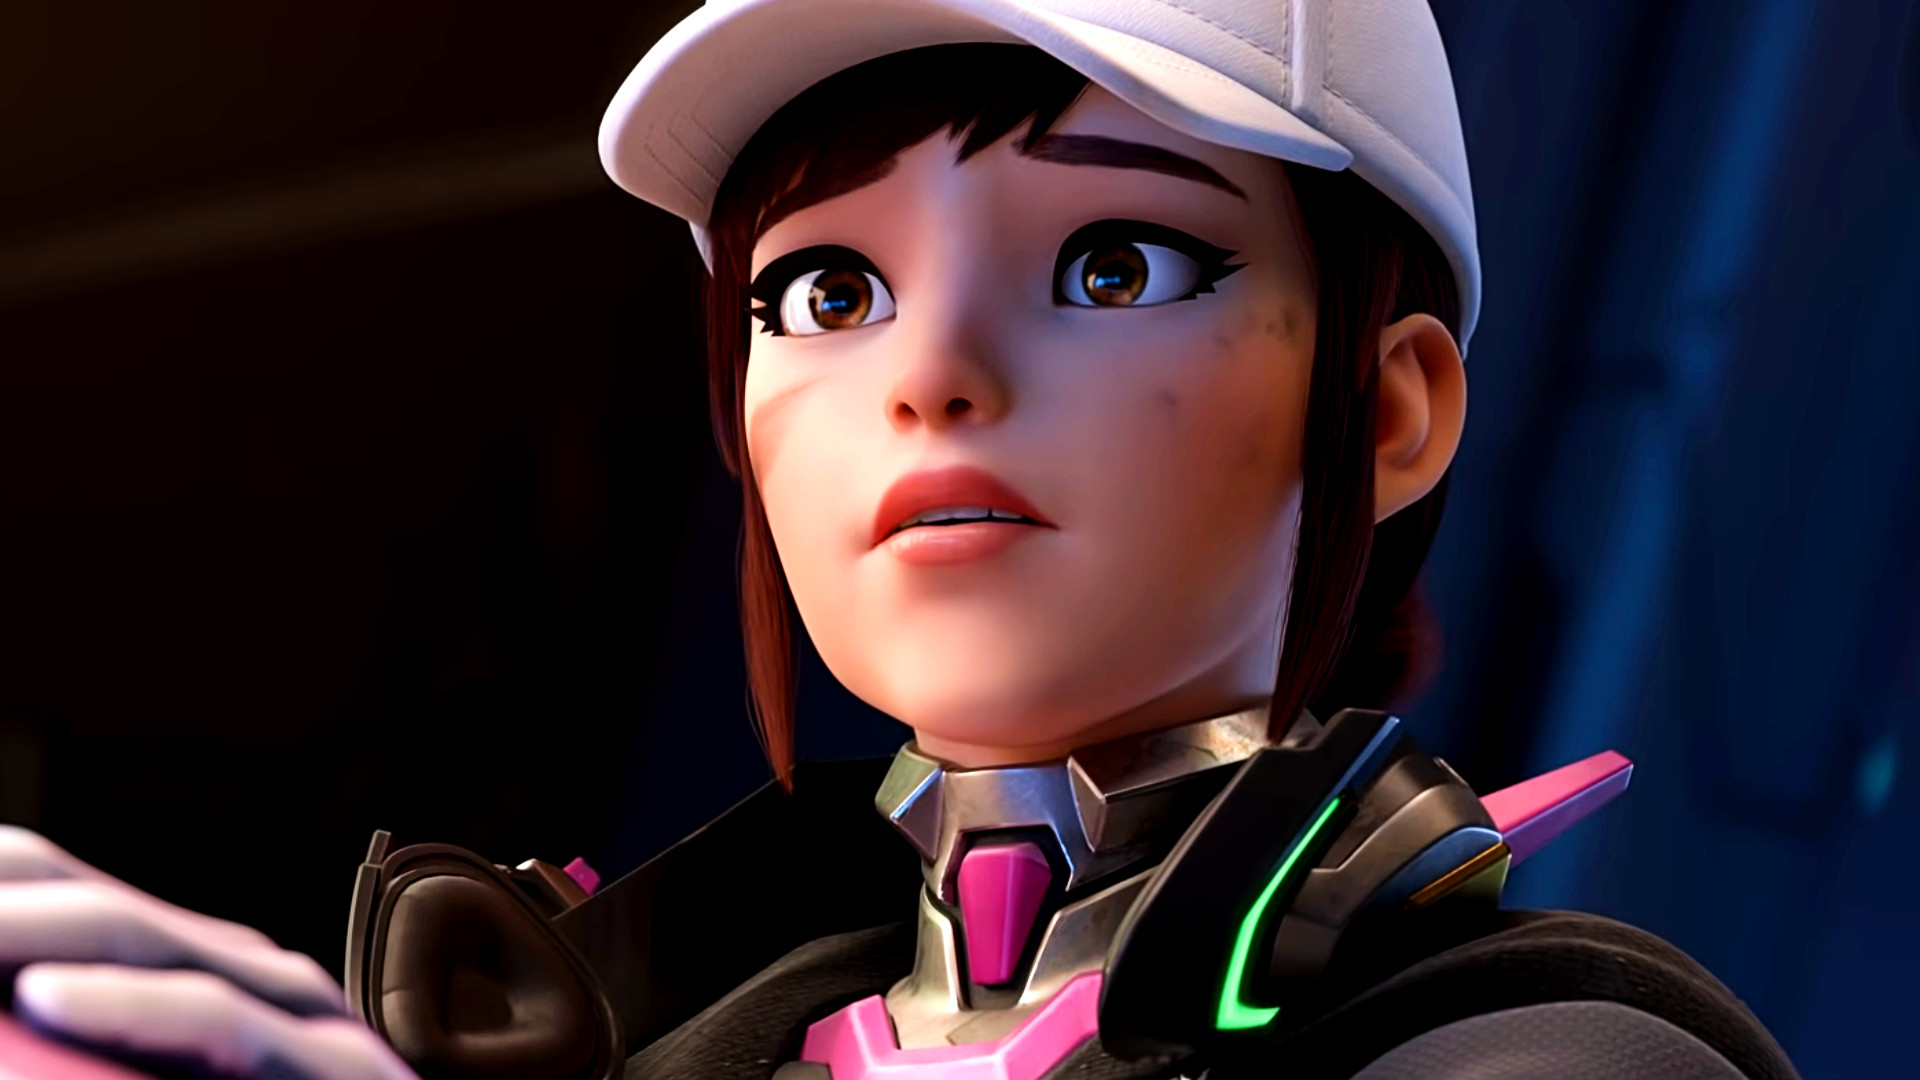 Overwatch 2 server downtime leaves players baffled, still in queues